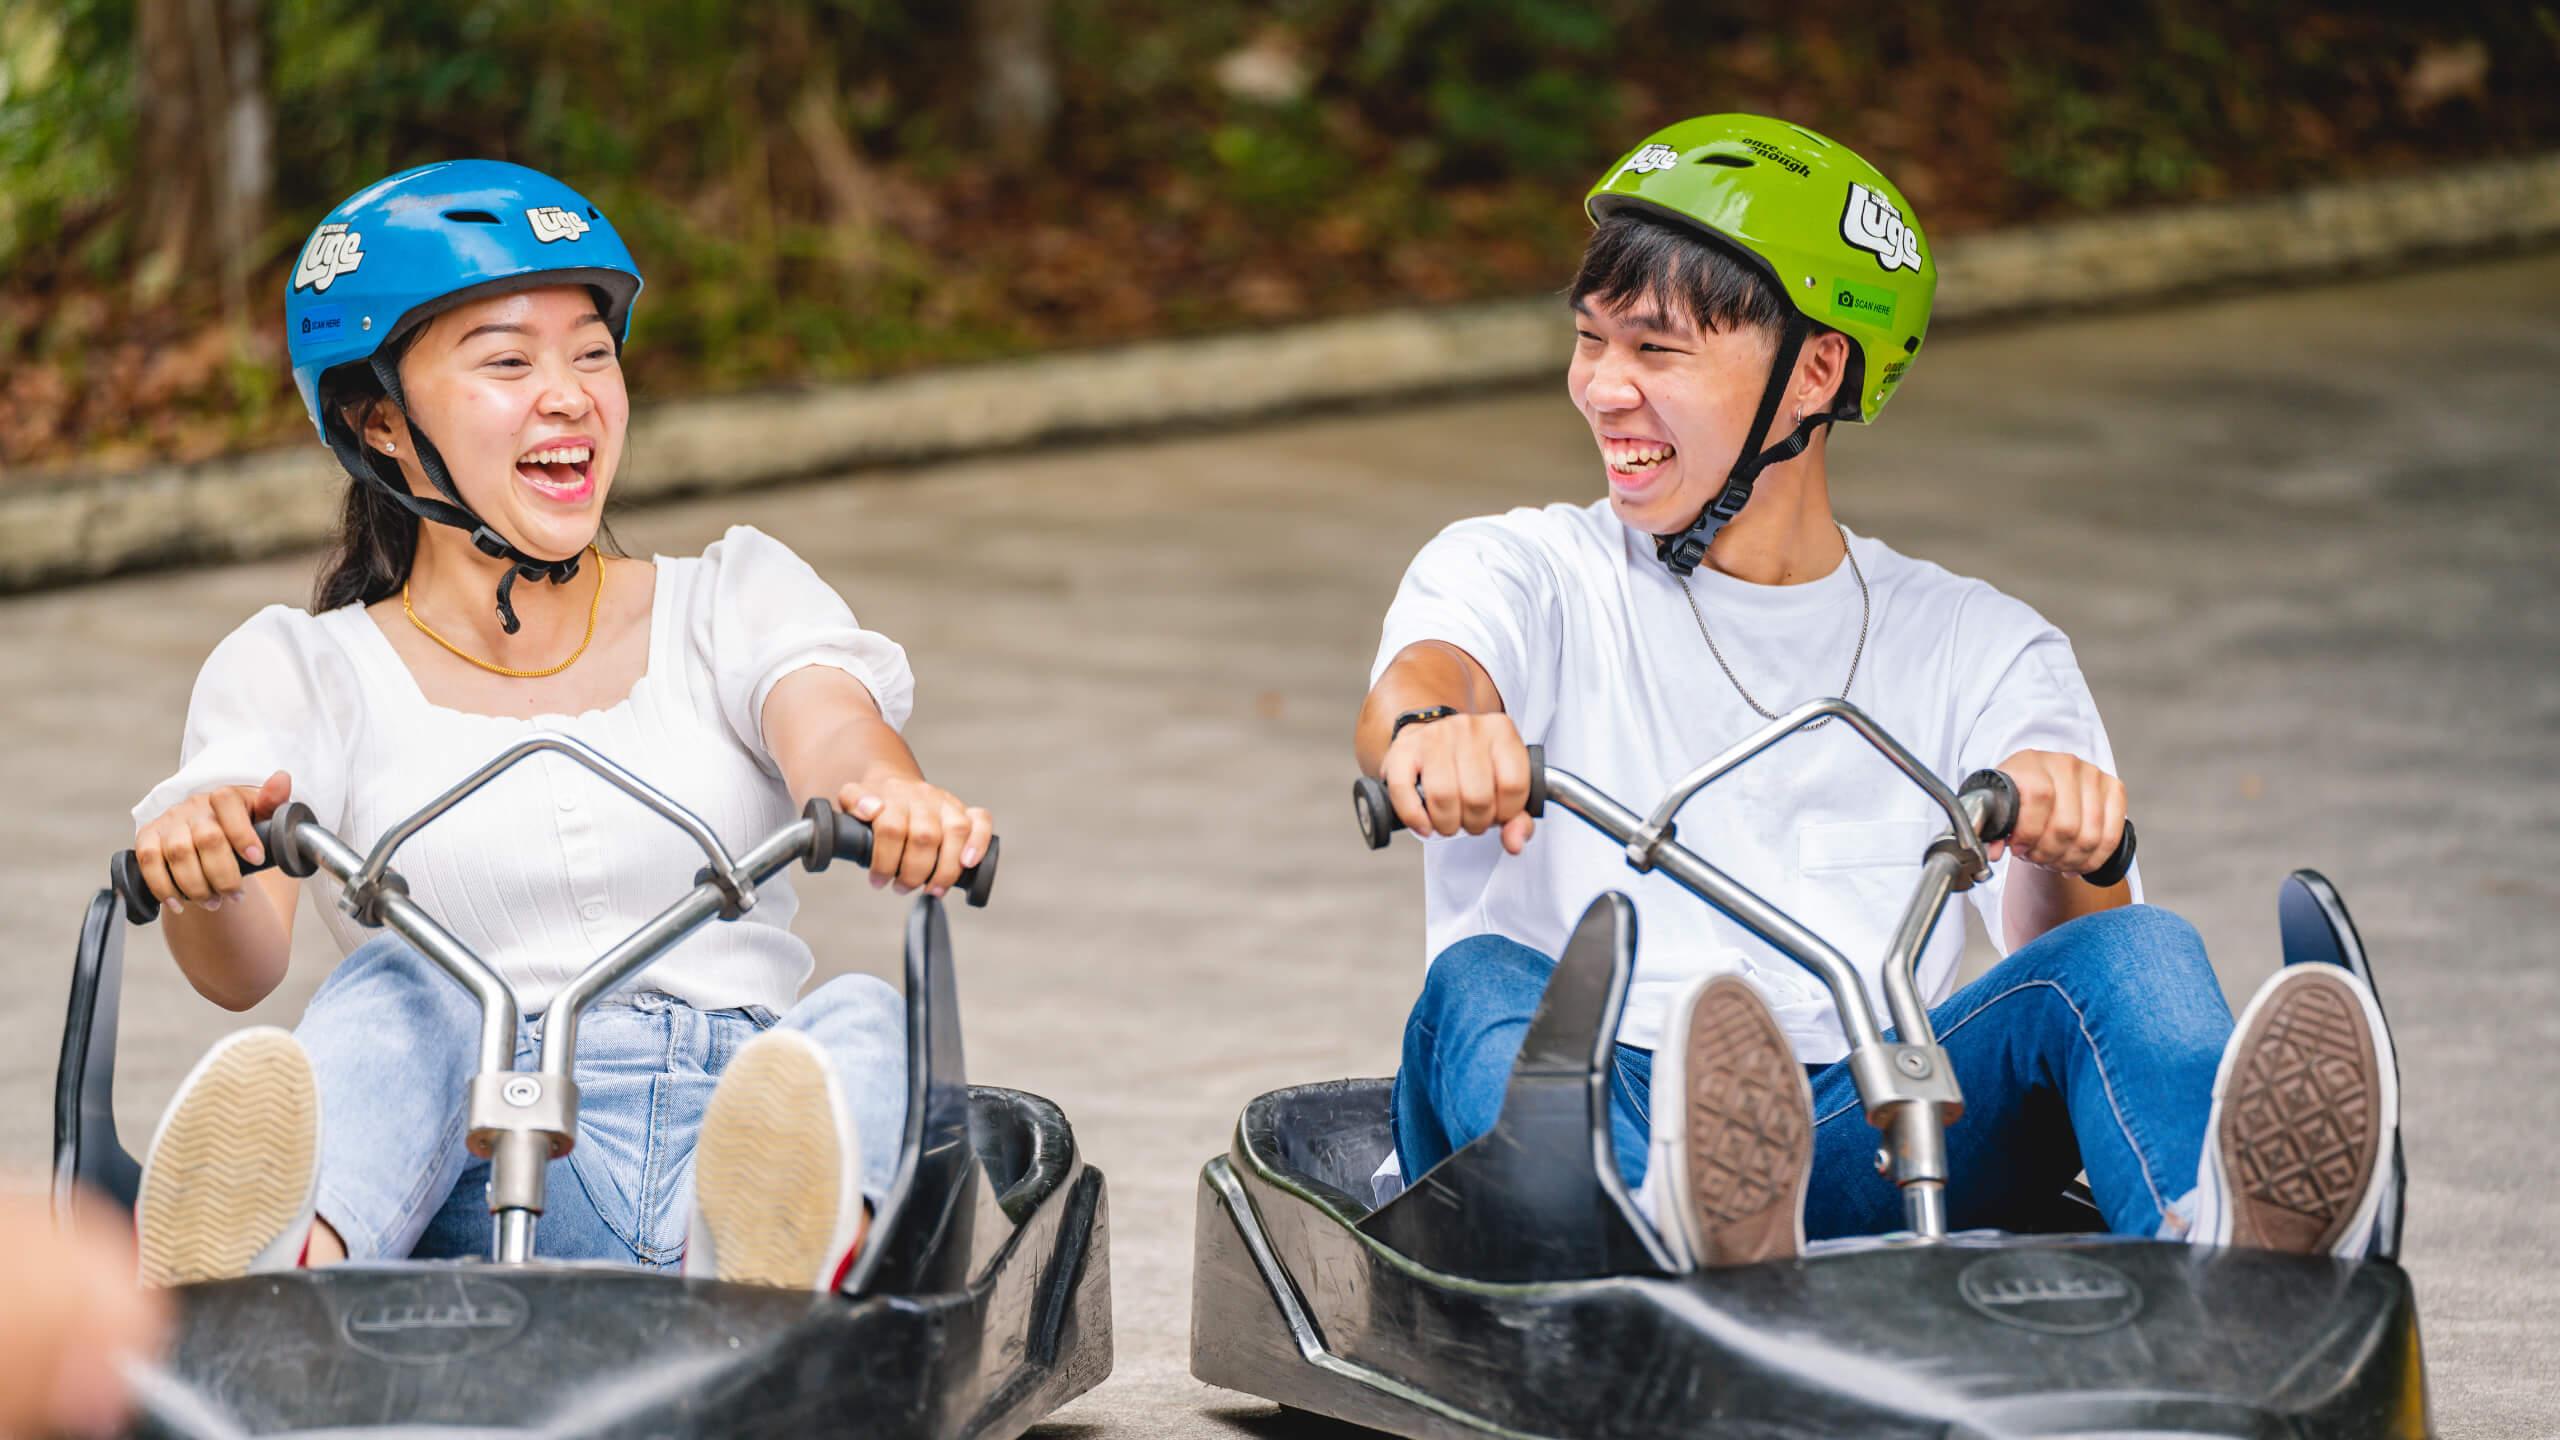 Two friends smile and giggle as they ride next to each other on the Luge tracks.